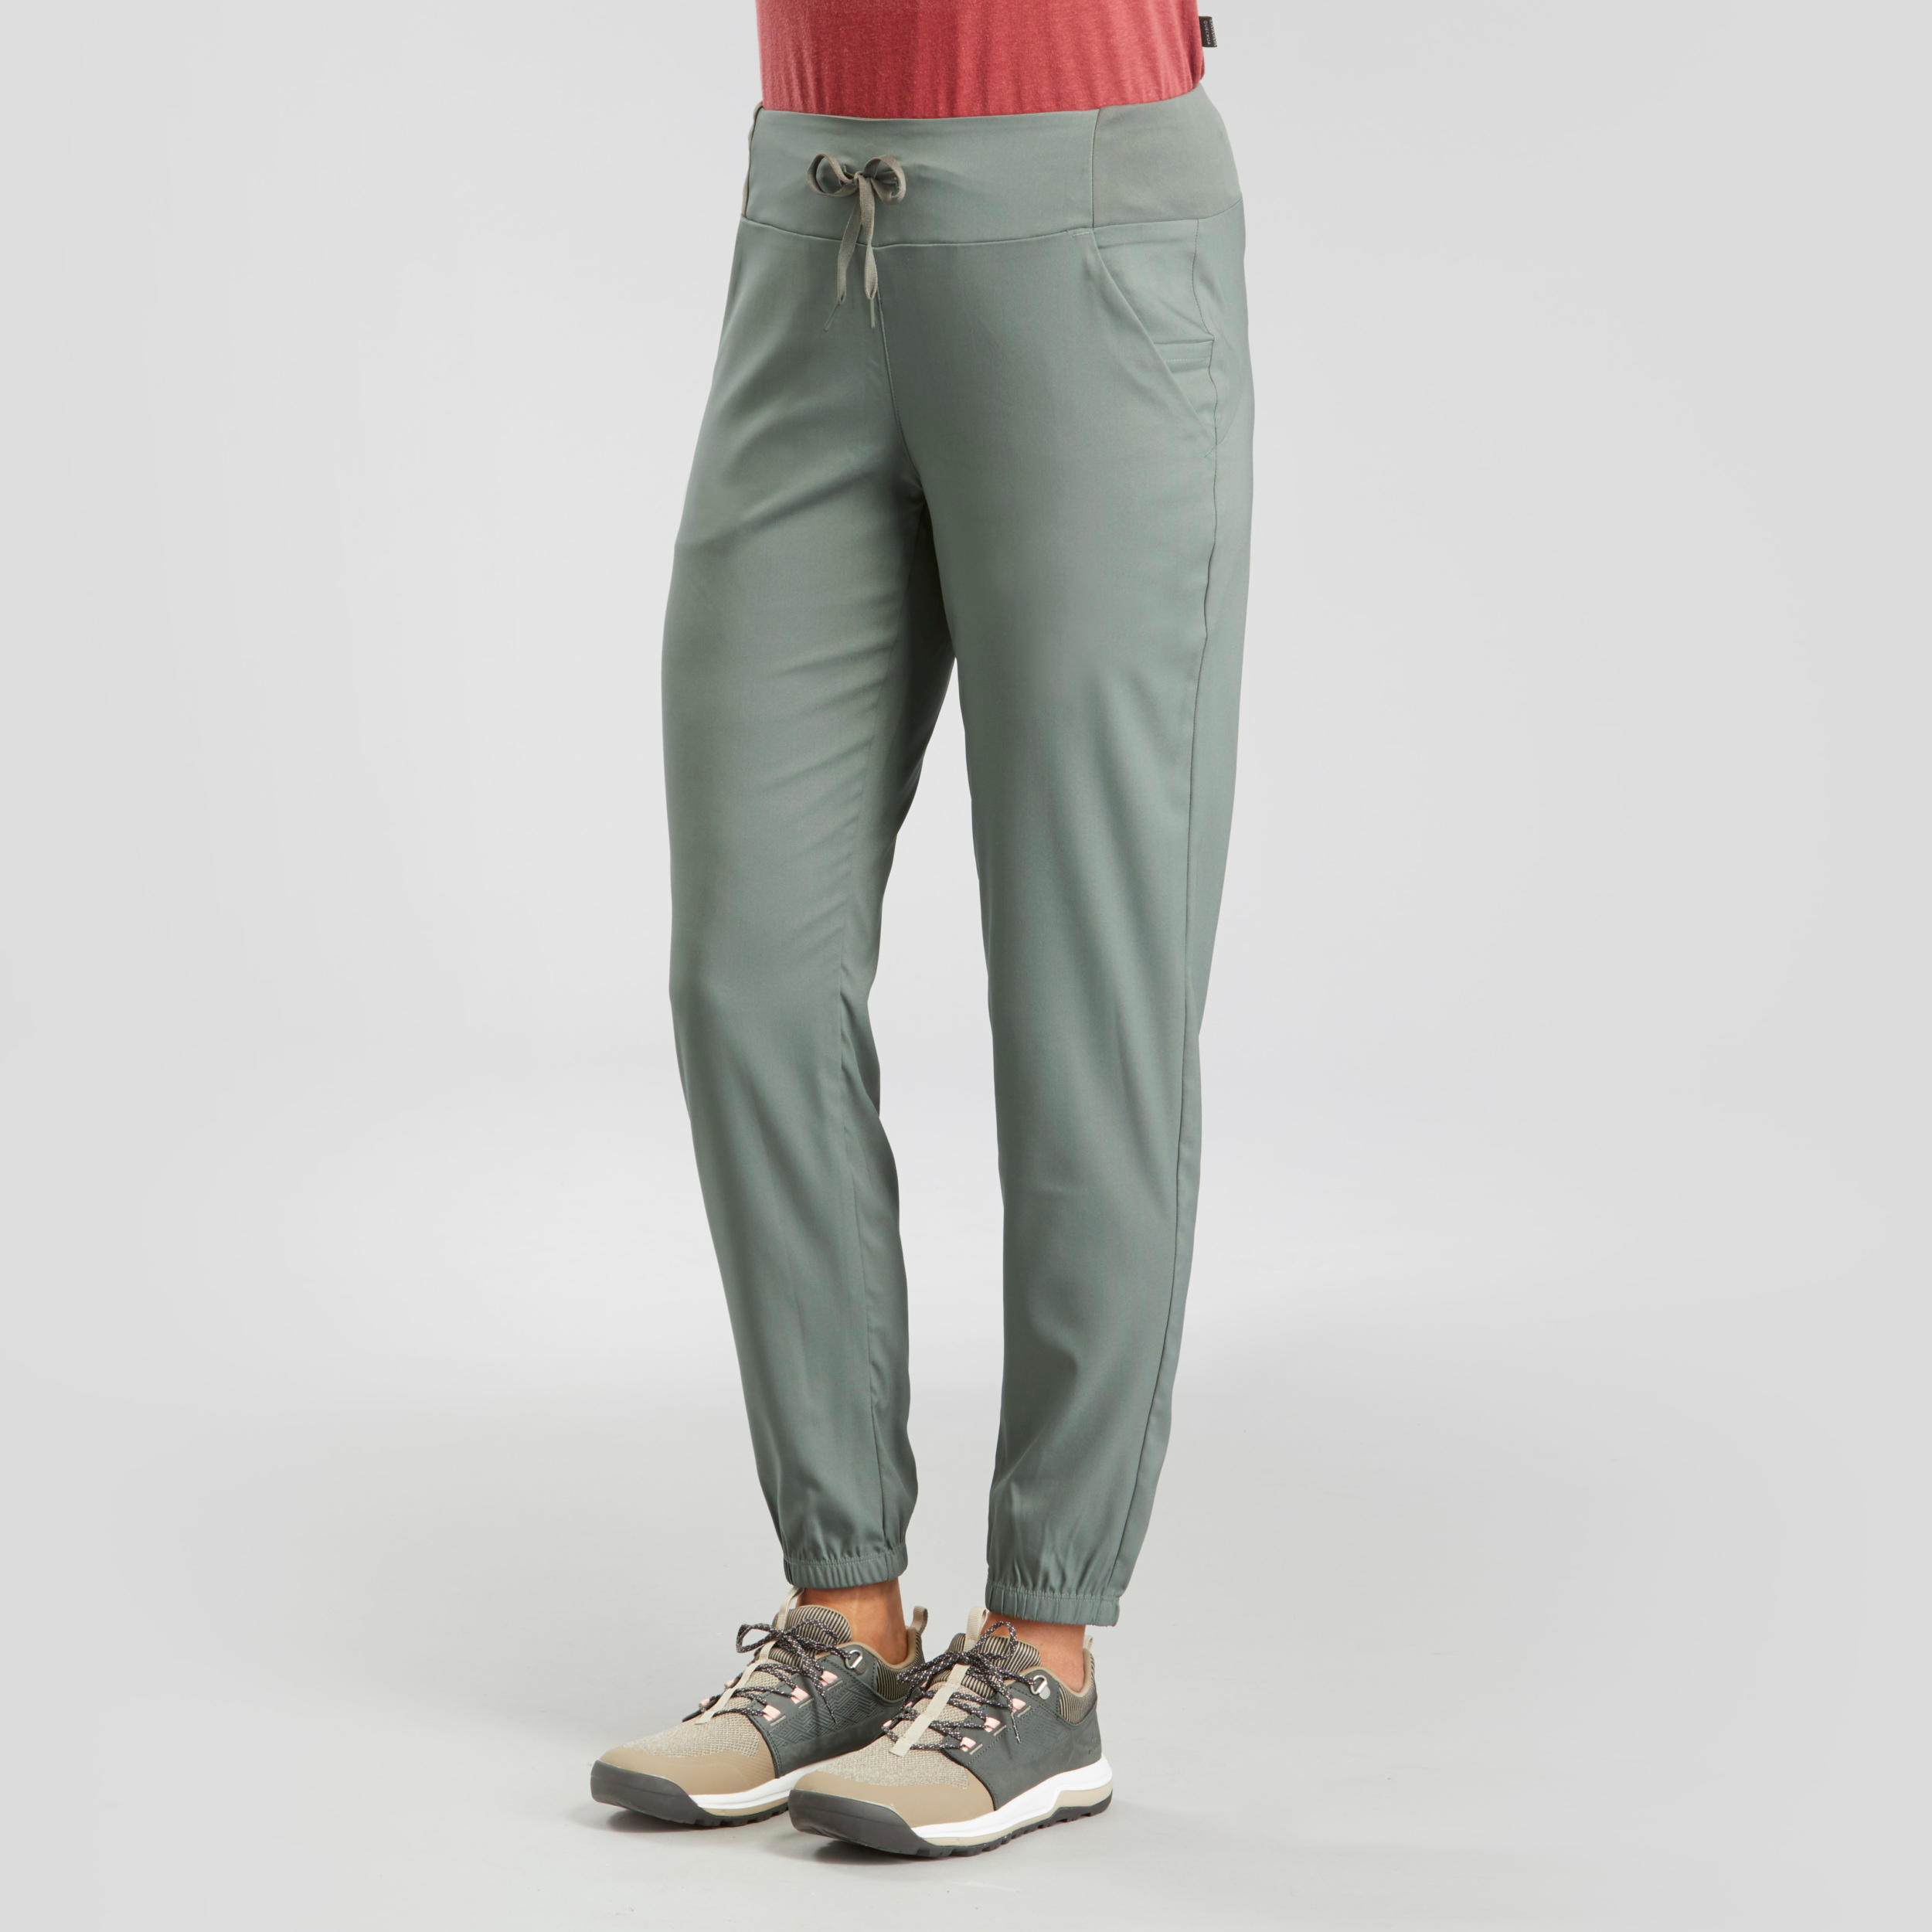 Womens Hiking Pants  Buy Clothes For Hiking